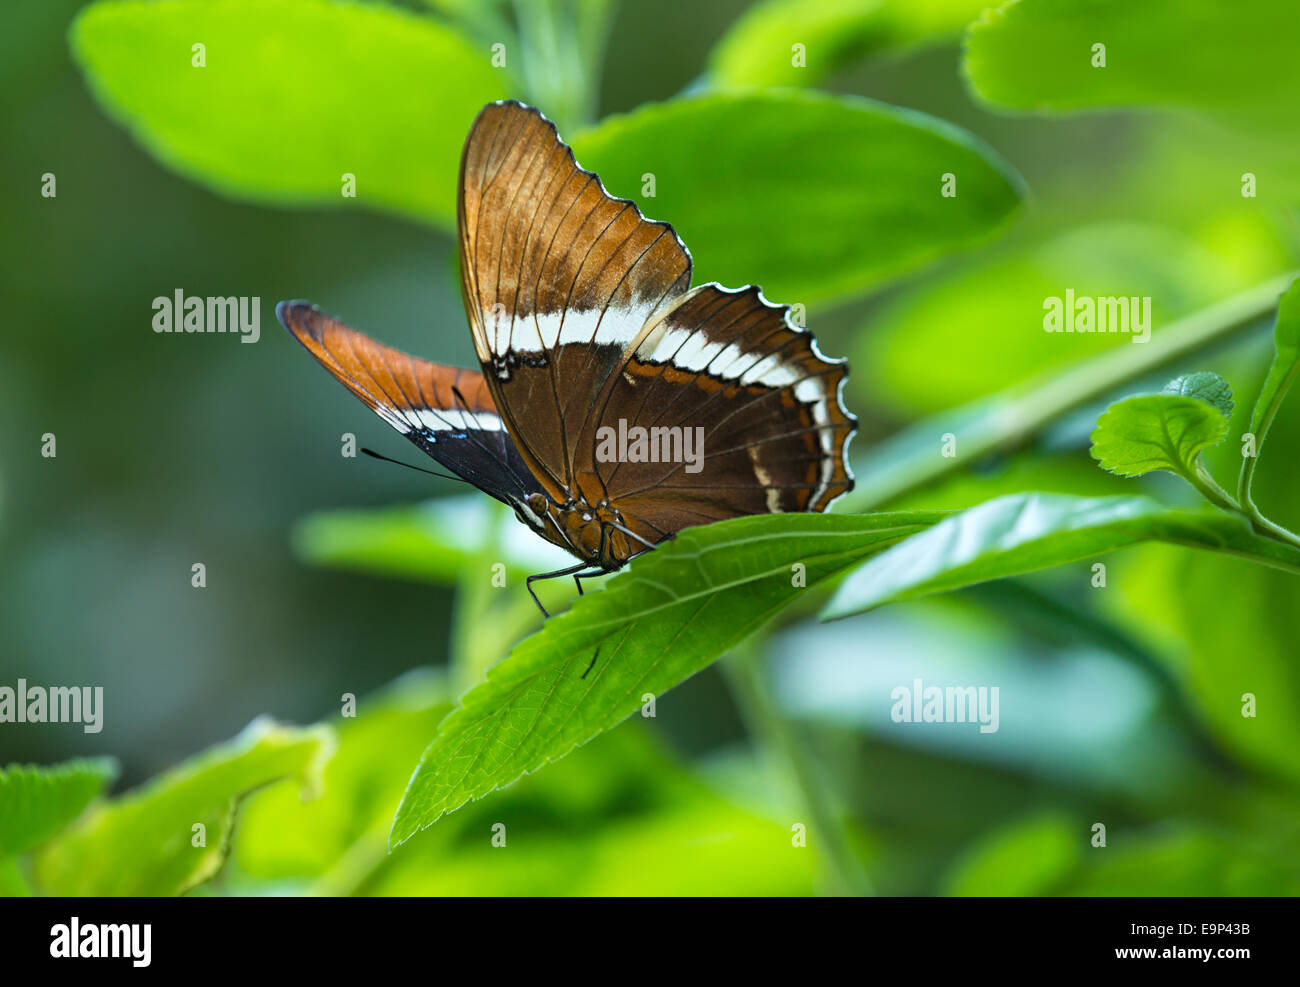 Rusty-tipped Page butterfly (Siproeta epaphus) perched on a leaf Stock Photo